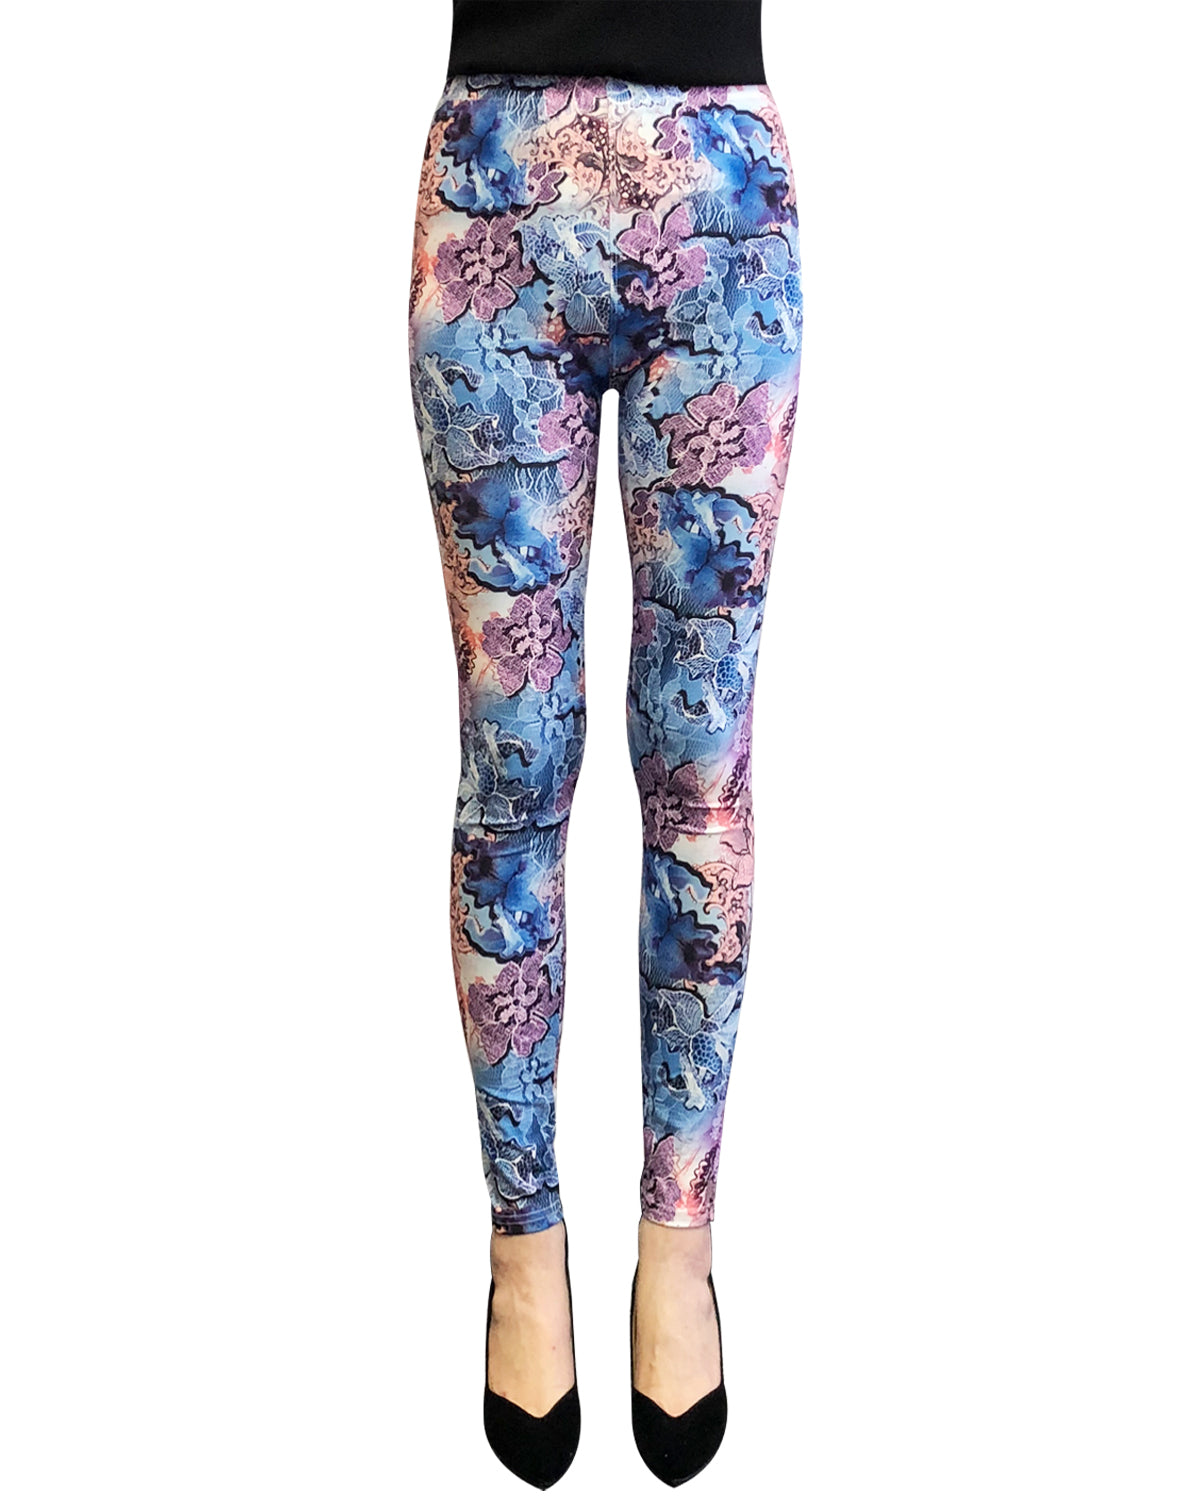 Wrapables Women's Ultra-Soft and Stretchy Printed Leggings for Activew